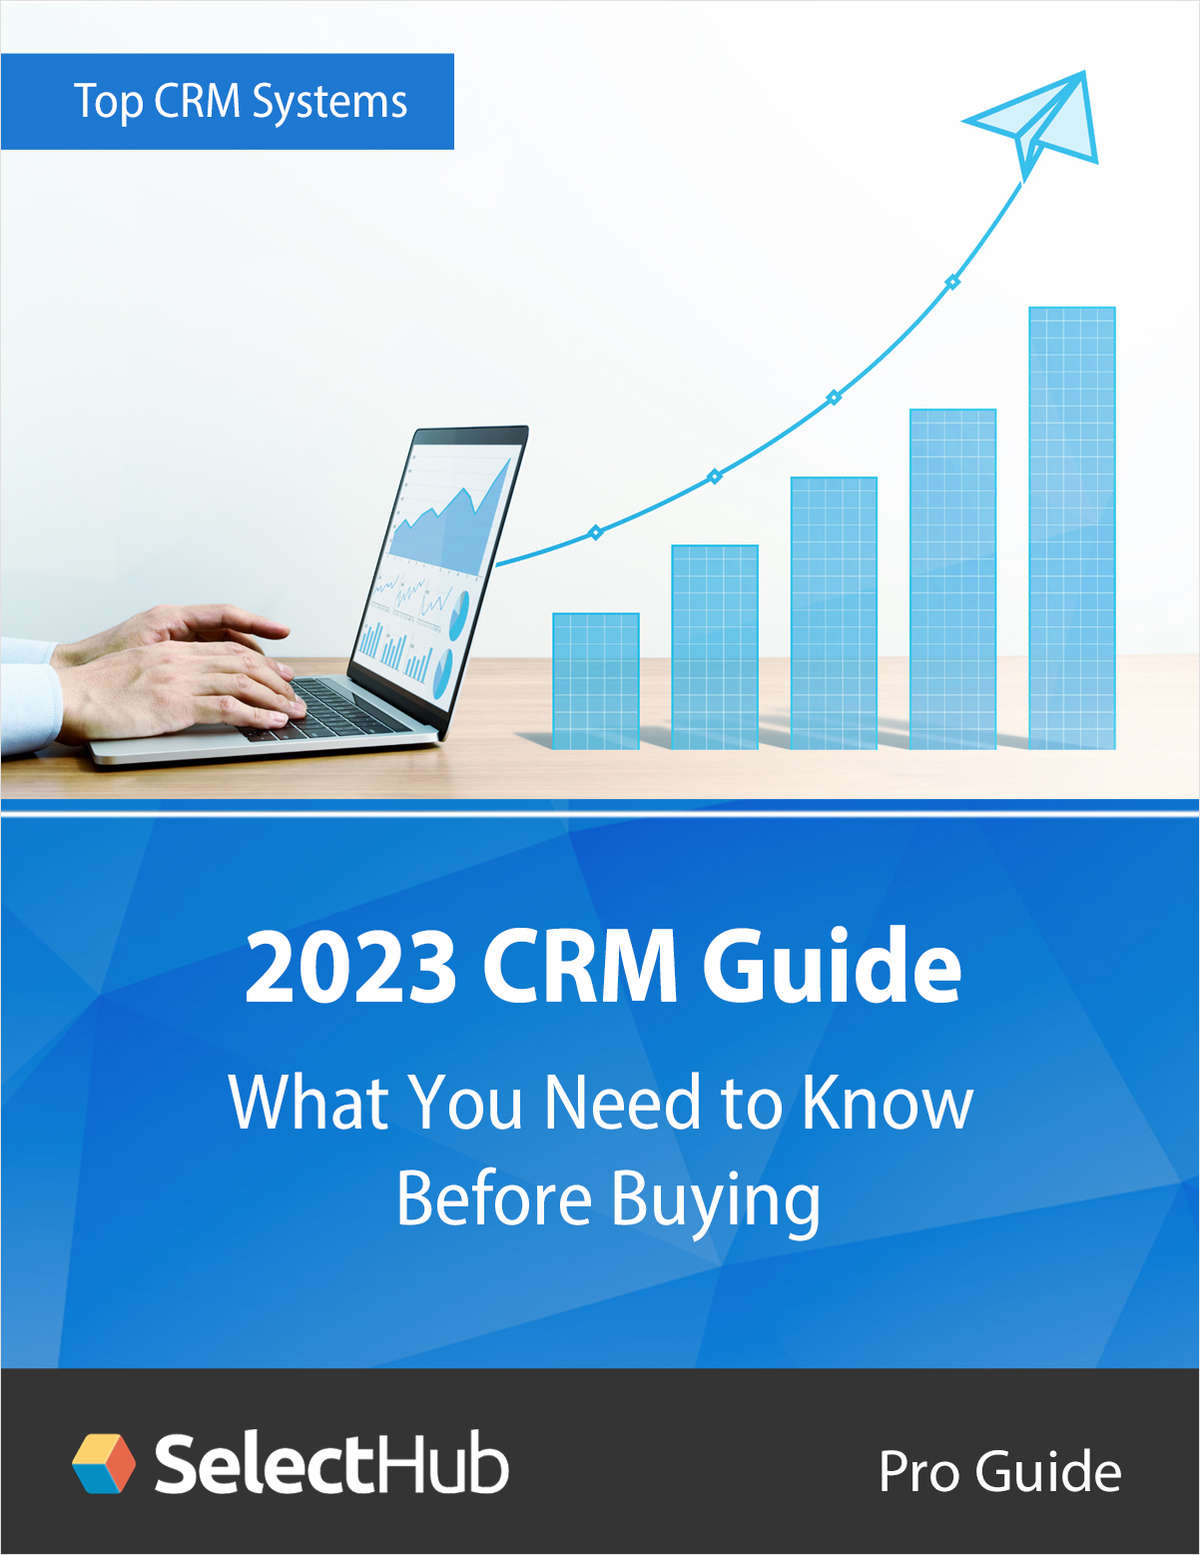 2023 CRM Guide: What You Need to Know Before Buying